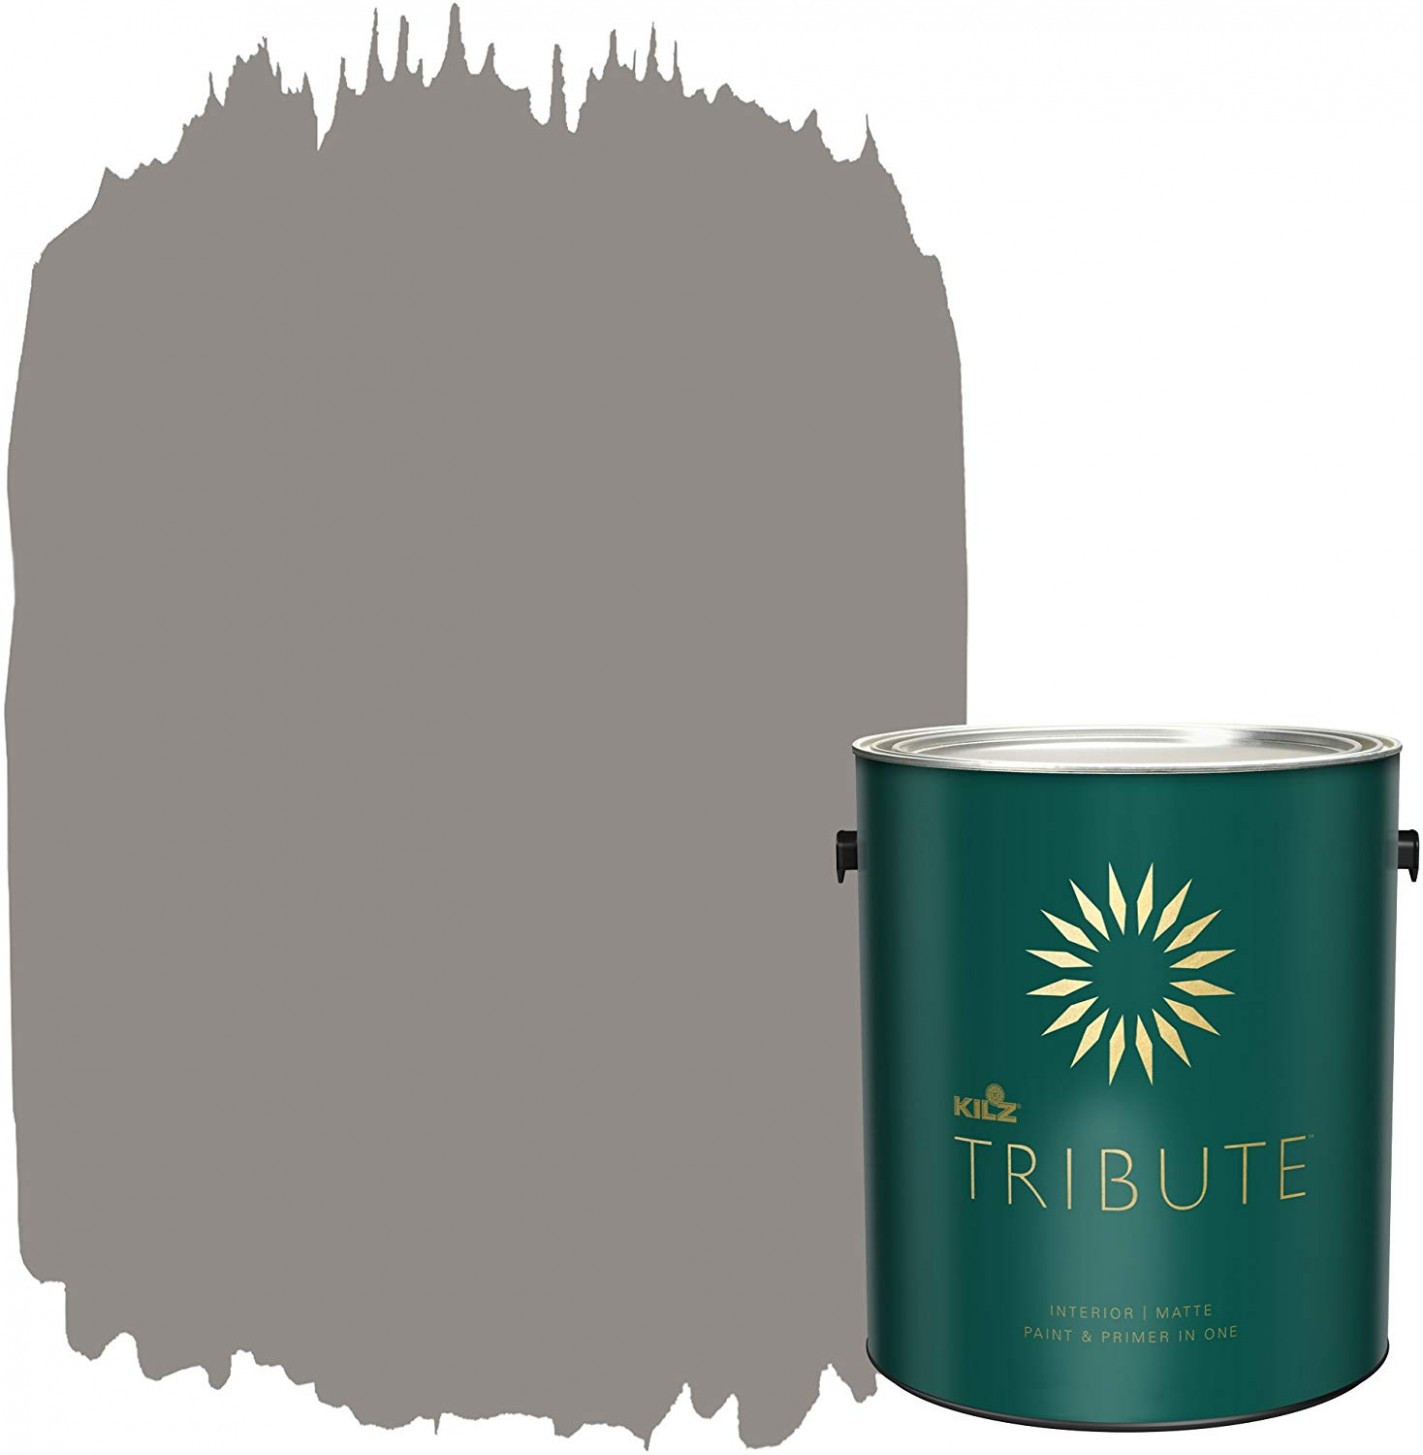 Kilz Tribute Interior Matte Paint And Primer In One, 8 Gallon, Chalk Suede (tb 8) Can You Paint Over Gl With Chalk Paint